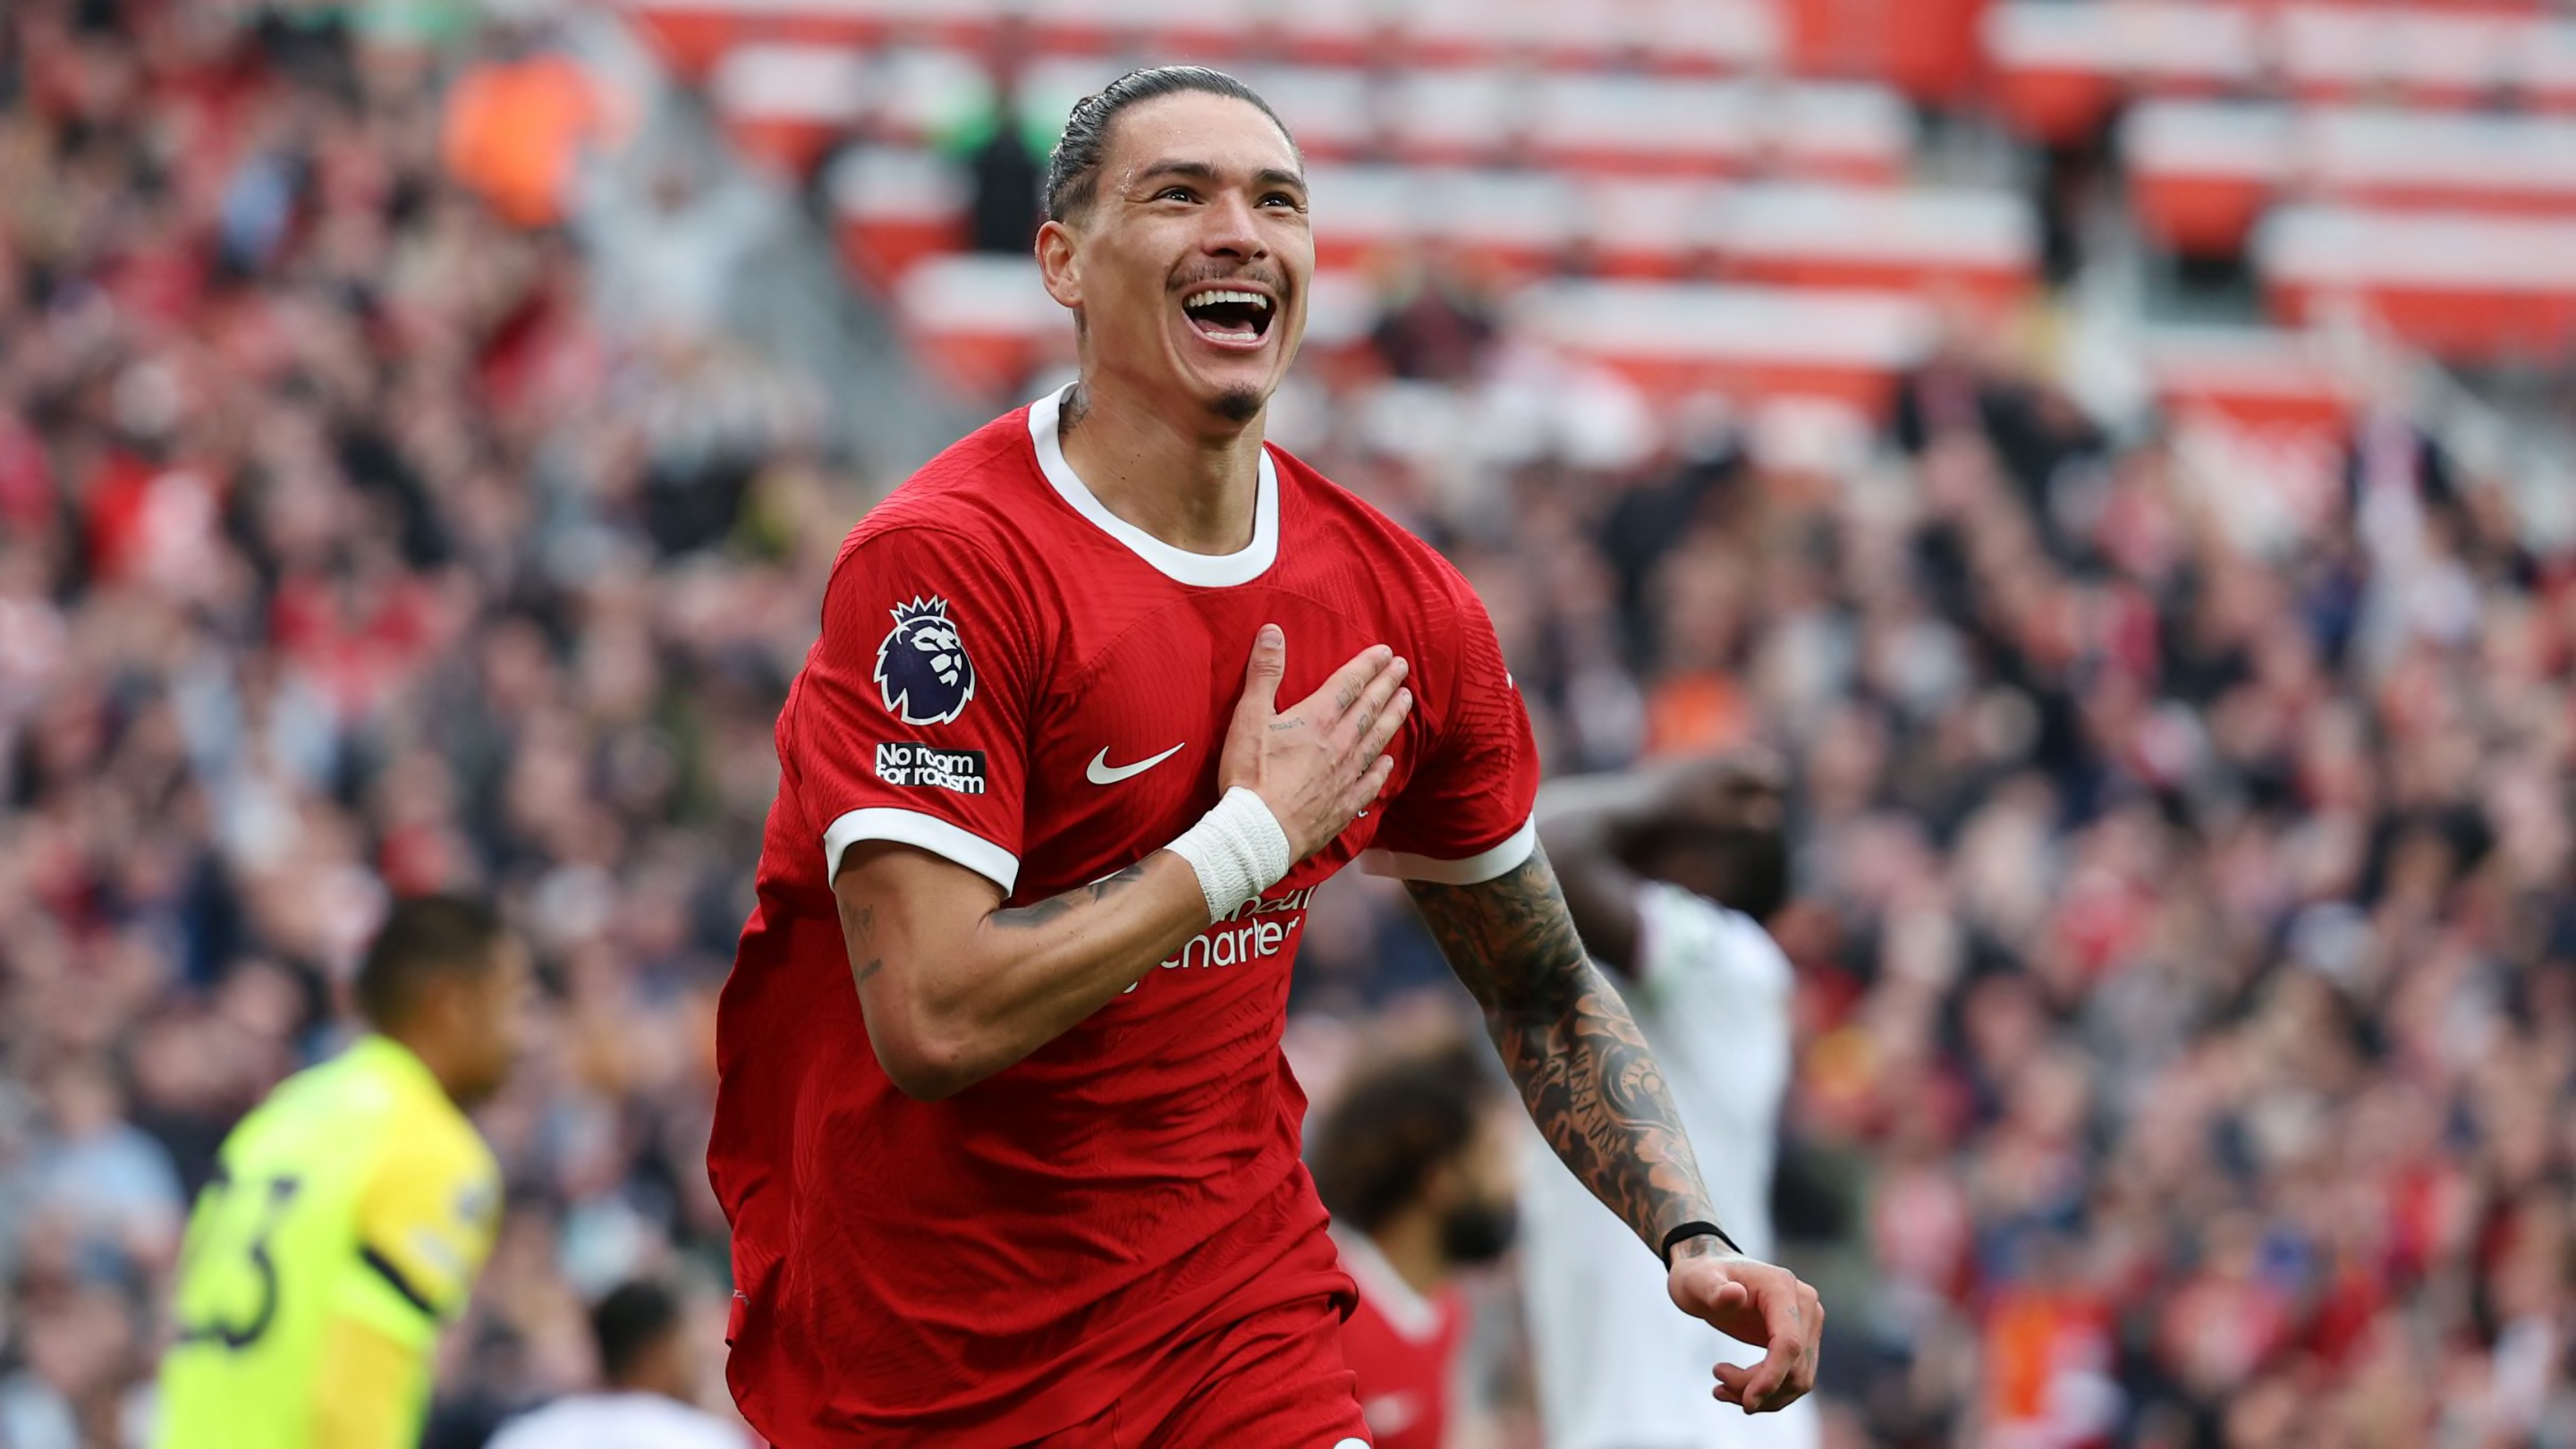 Liverpool 3-1 West Ham: Player ratings as Nunez goal secures fifth straight win